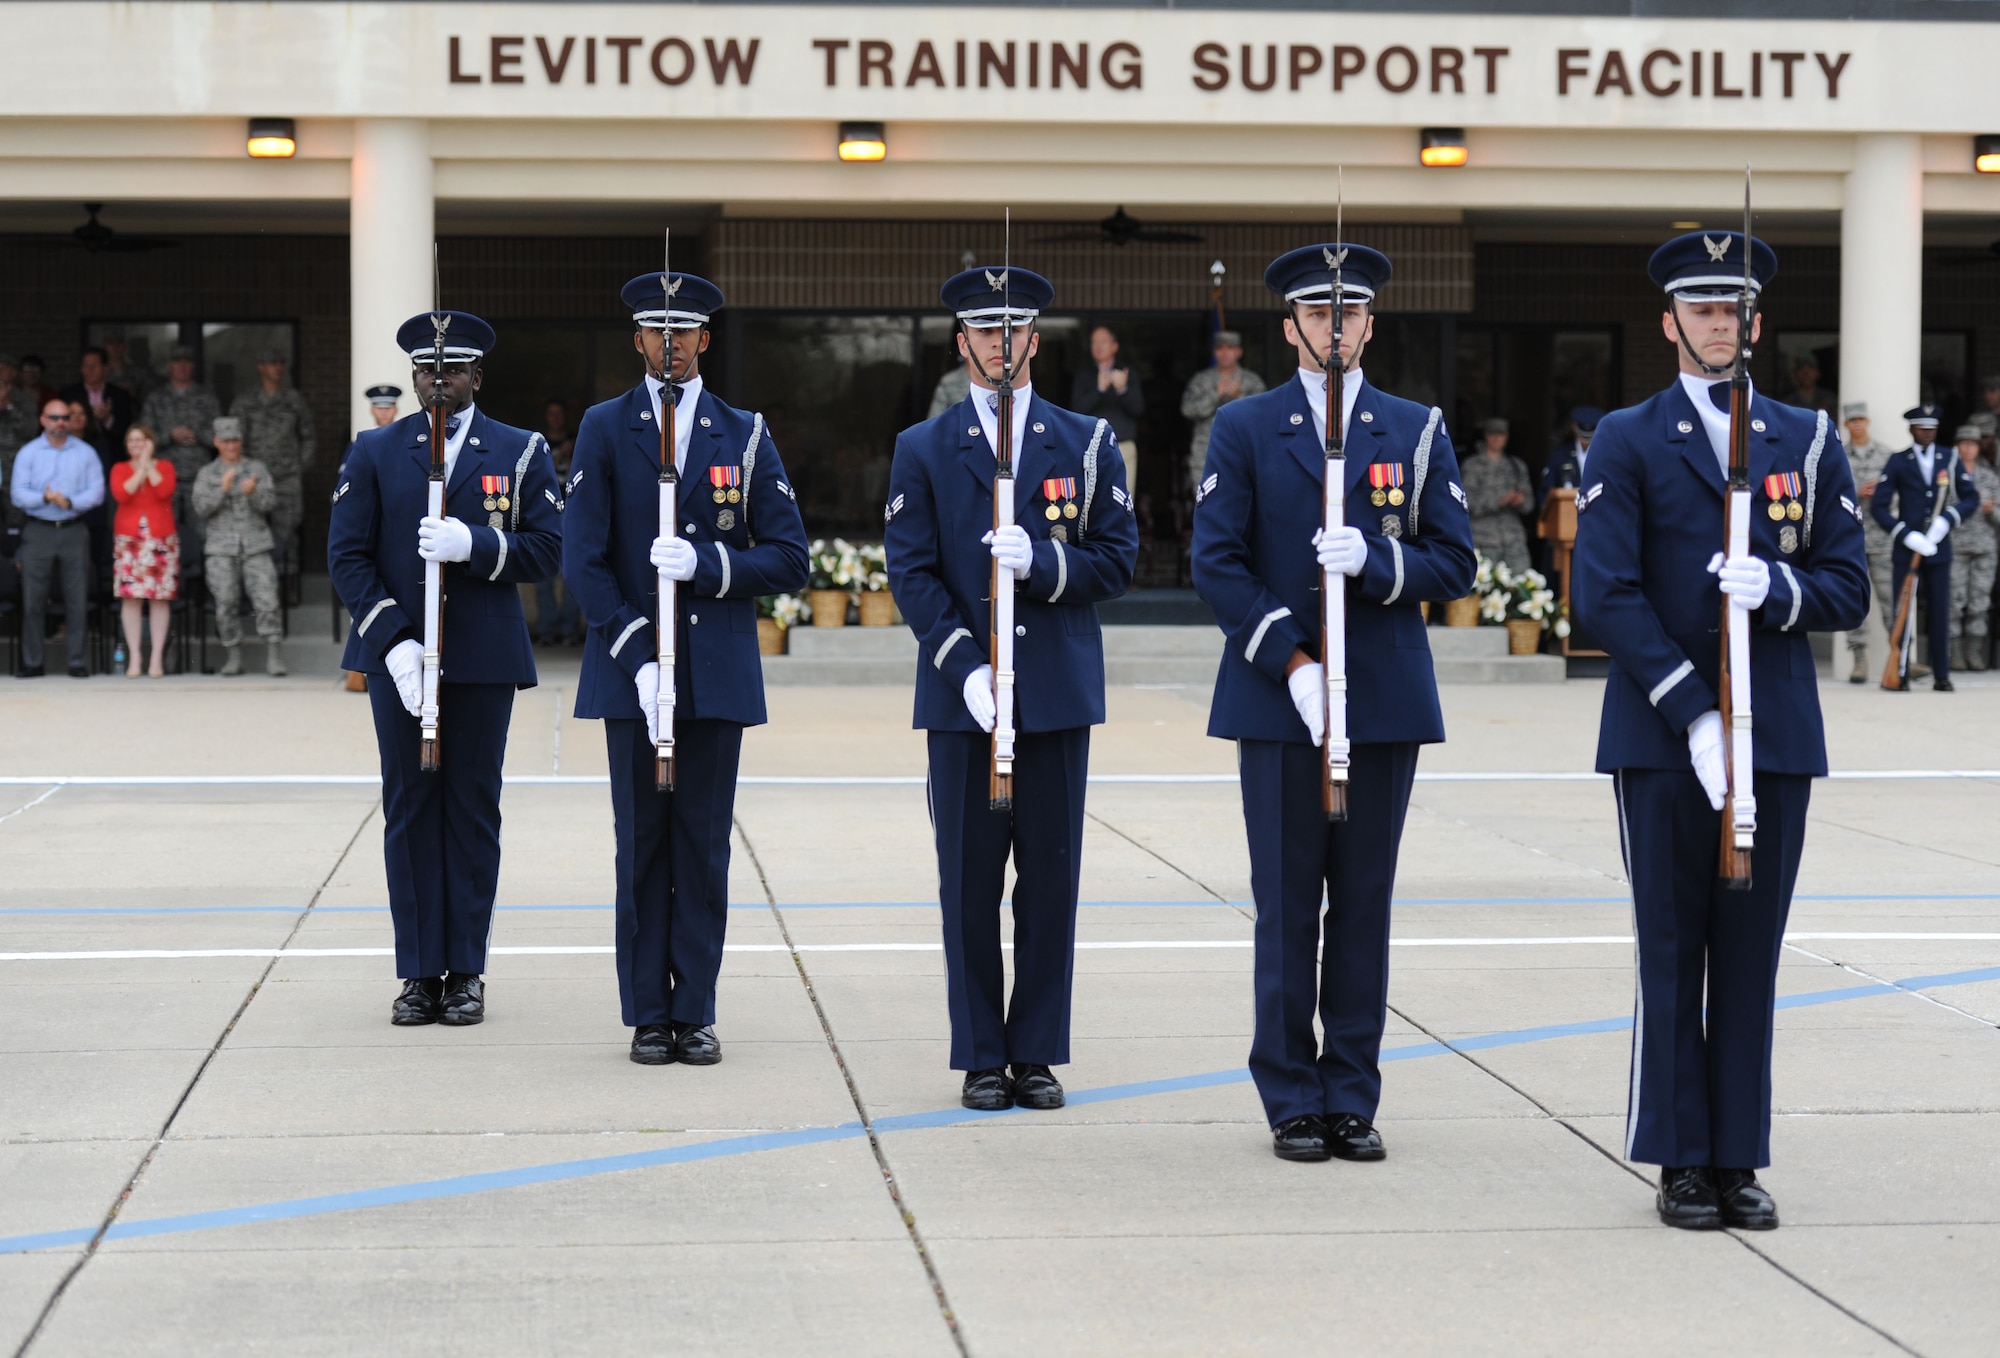 The U.S. Air Force Honor Guard Drill Team debuts their 2017 routine during the 81st Training Group drill down at the Levitow Training Support Facility drill pad March 10, 2017, on Keesler Air Force Base, Miss. The team comes to Keesler every year for five weeks to develop a new routine that they will use throughout the year. (U.S. Air Force photo by Kemberly Groue)